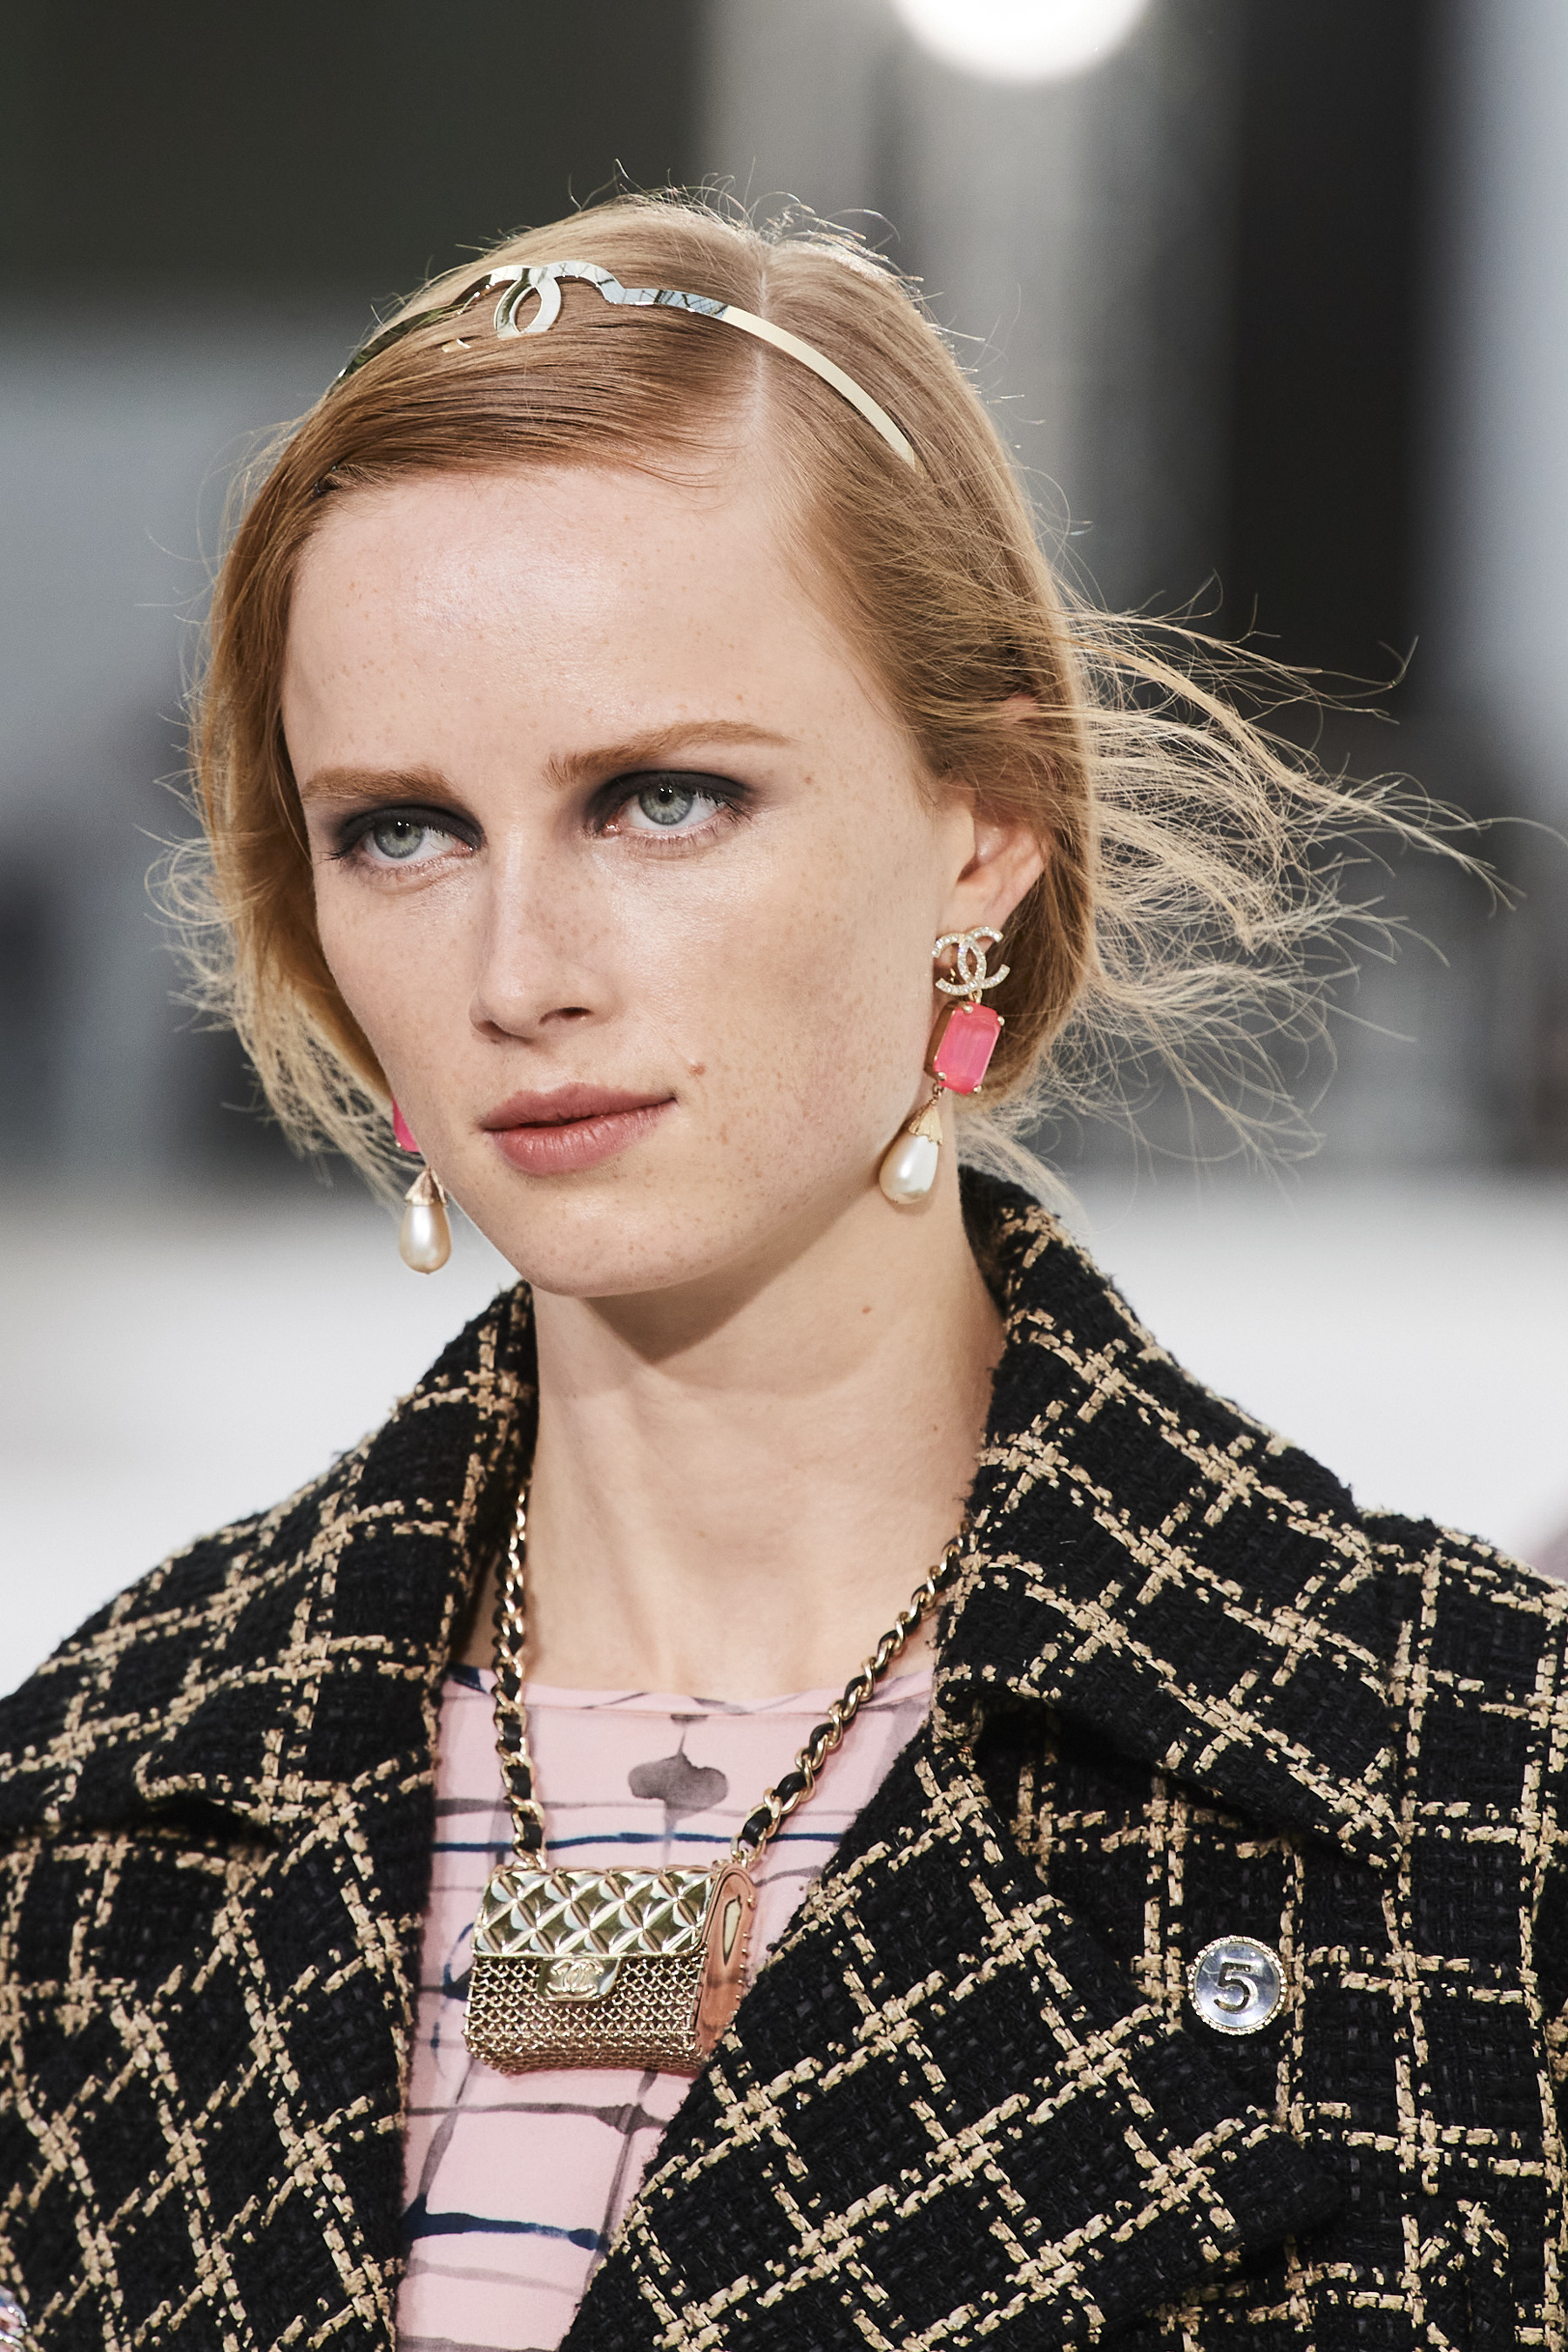 Chanel Spring 2021 Fashion Show Details | The Impression